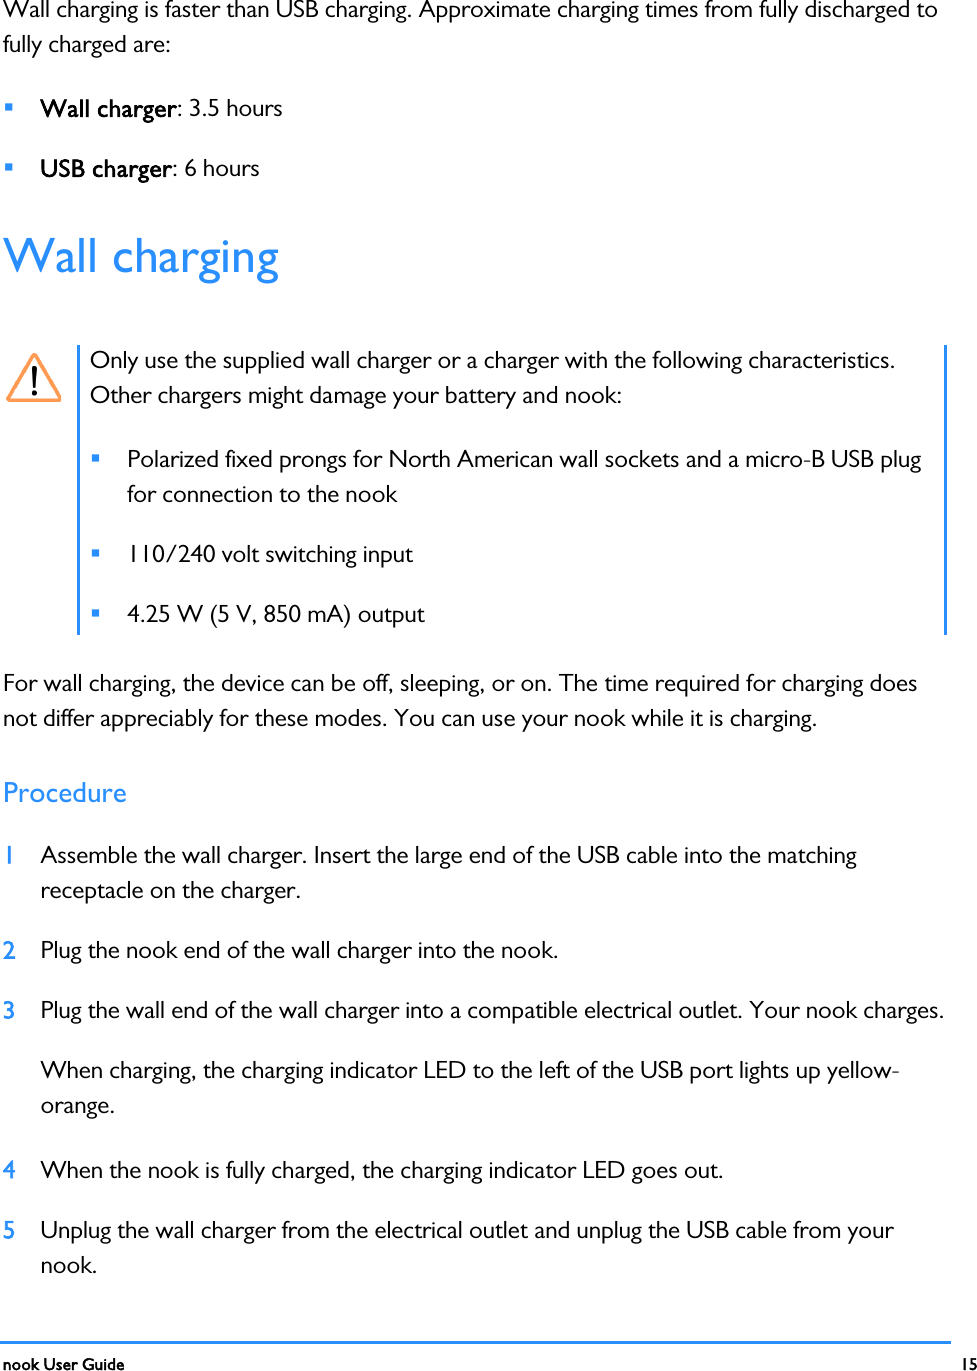  nook User Guide    15        Wall charging is faster than USB charging. Approximate charging times from fully discharged to fully charged are:  Wall charger: 3.5 hours  USB charger: 6 hours Wall charging   Only use the supplied wall charger or a charger with the following characteristics. Other chargers might damage your battery and nook:  Polarized fixed prongs for North American wall sockets and a micro-B USB plug for connection to the nook  110/240 volt switching input  4.25 W (5 V, 850 mA) output For wall charging, the device can be off, sleeping, or on. The time required for charging does not differ appreciably for these modes. You can use your nook while it is charging. Procedure 1 Assemble the wall charger. Insert the large end of the USB cable into the matching receptacle on the charger. 2 Plug the nook end of the wall charger into the nook. 3 Plug the wall end of the wall charger into a compatible electrical outlet. Your nook charges. When charging, the charging indicator LED to the left of the USB port lights up yellow-orange. 4 When the nook is fully charged, the charging indicator LED goes out. 5 Unplug the wall charger from the electrical outlet and unplug the USB cable from your nook.  